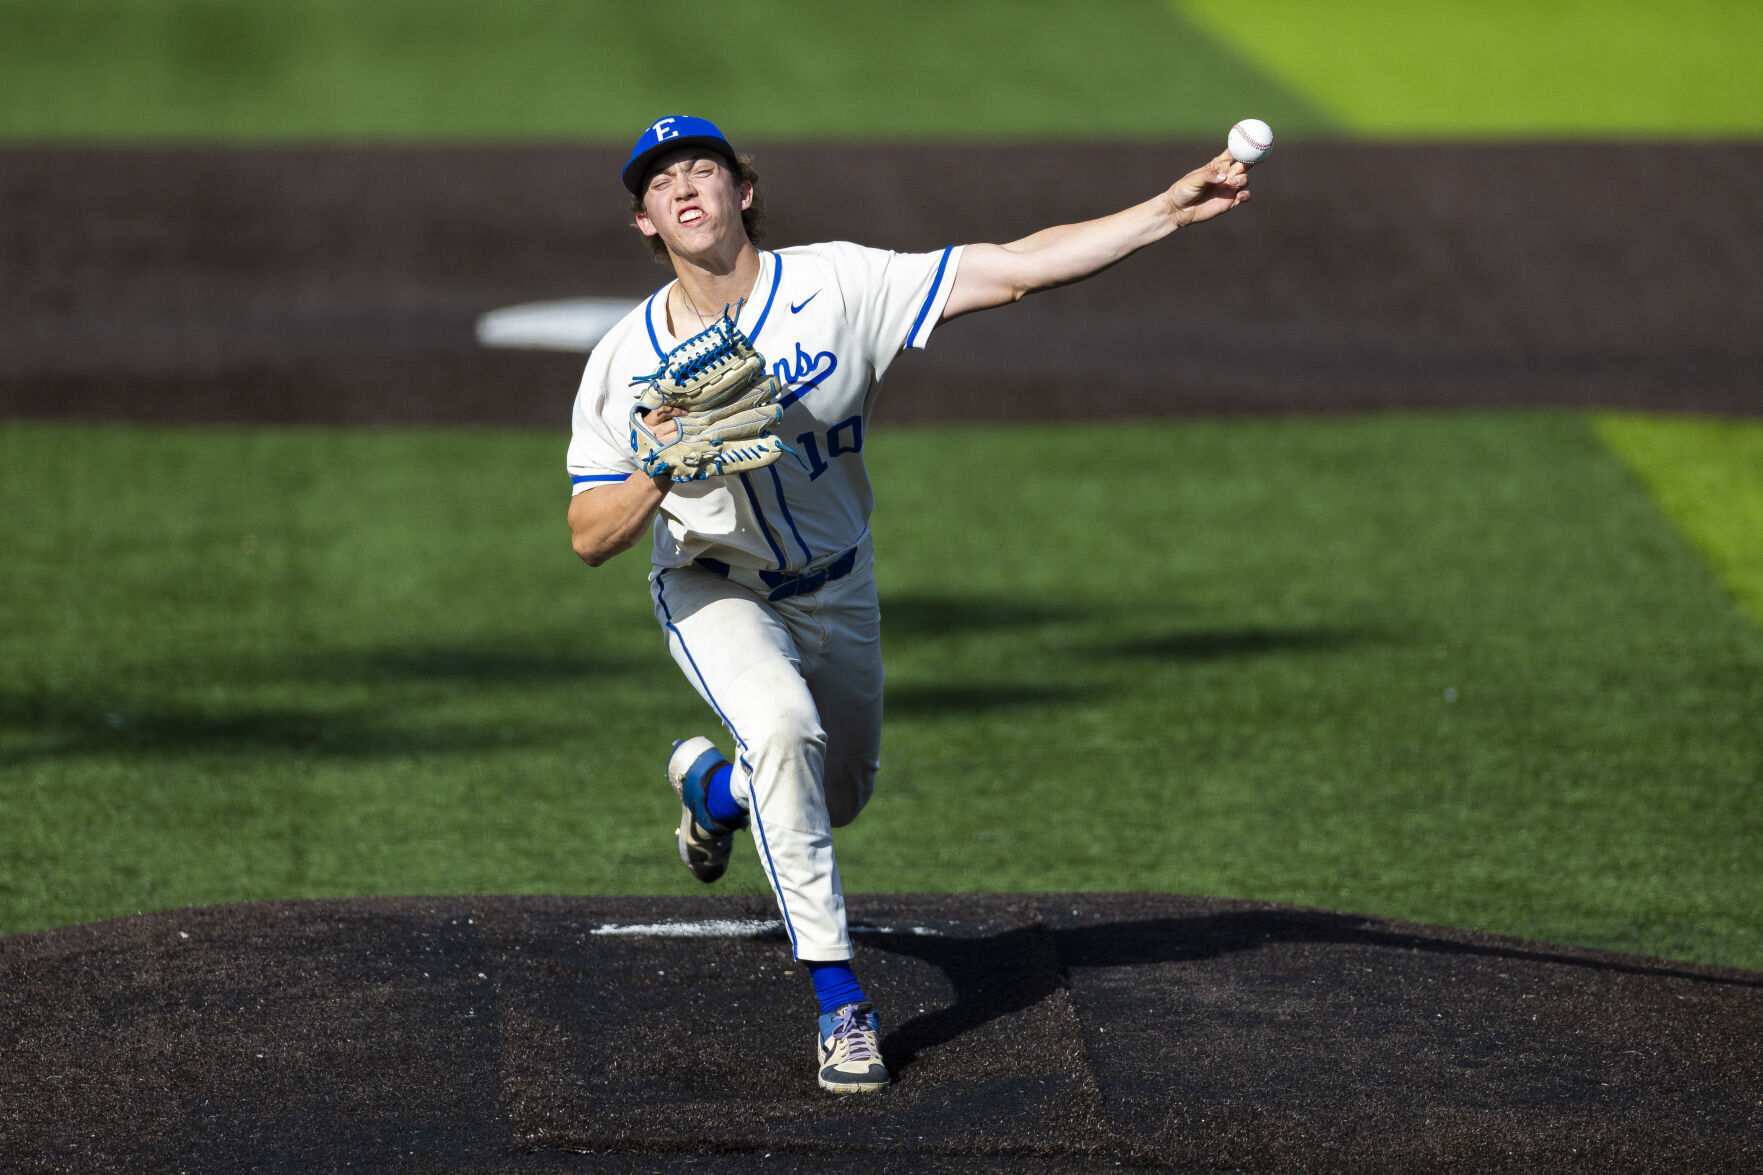 Lincoln East Dominates A-1 District Final with 9-0 Win: Carter Mick Shines with 11 Strikeouts